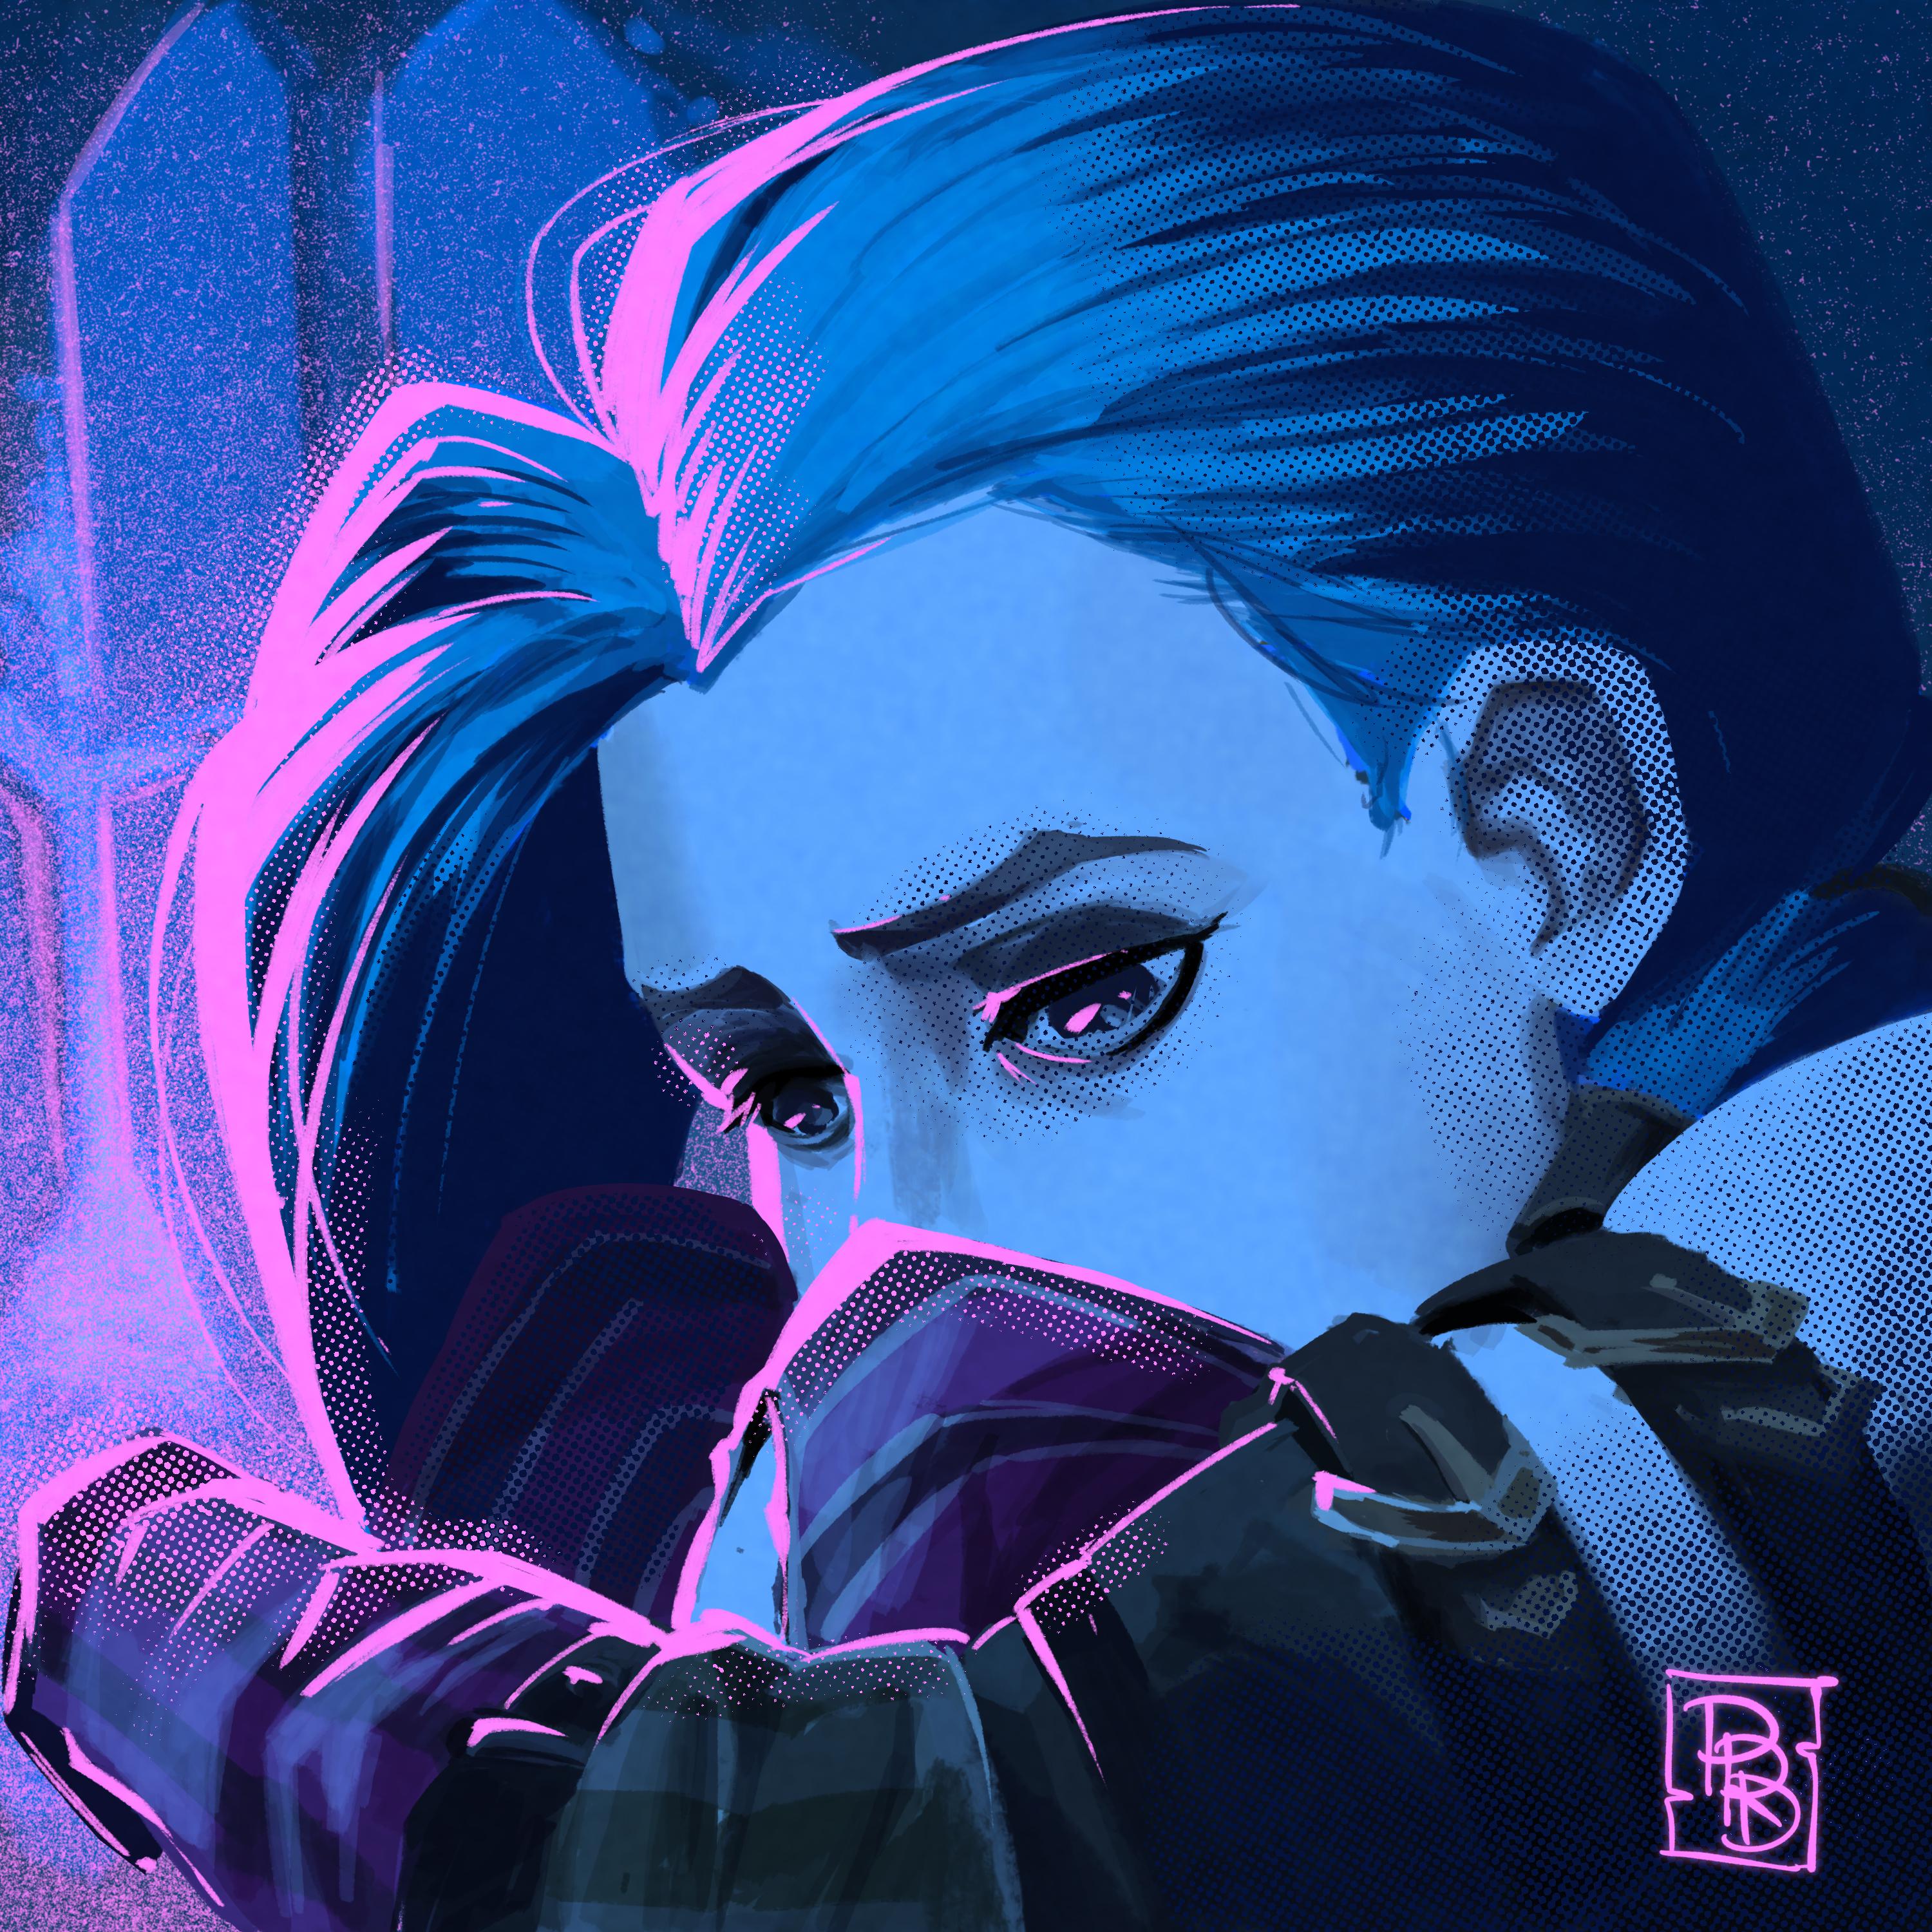 My take on Jinx from Arcane